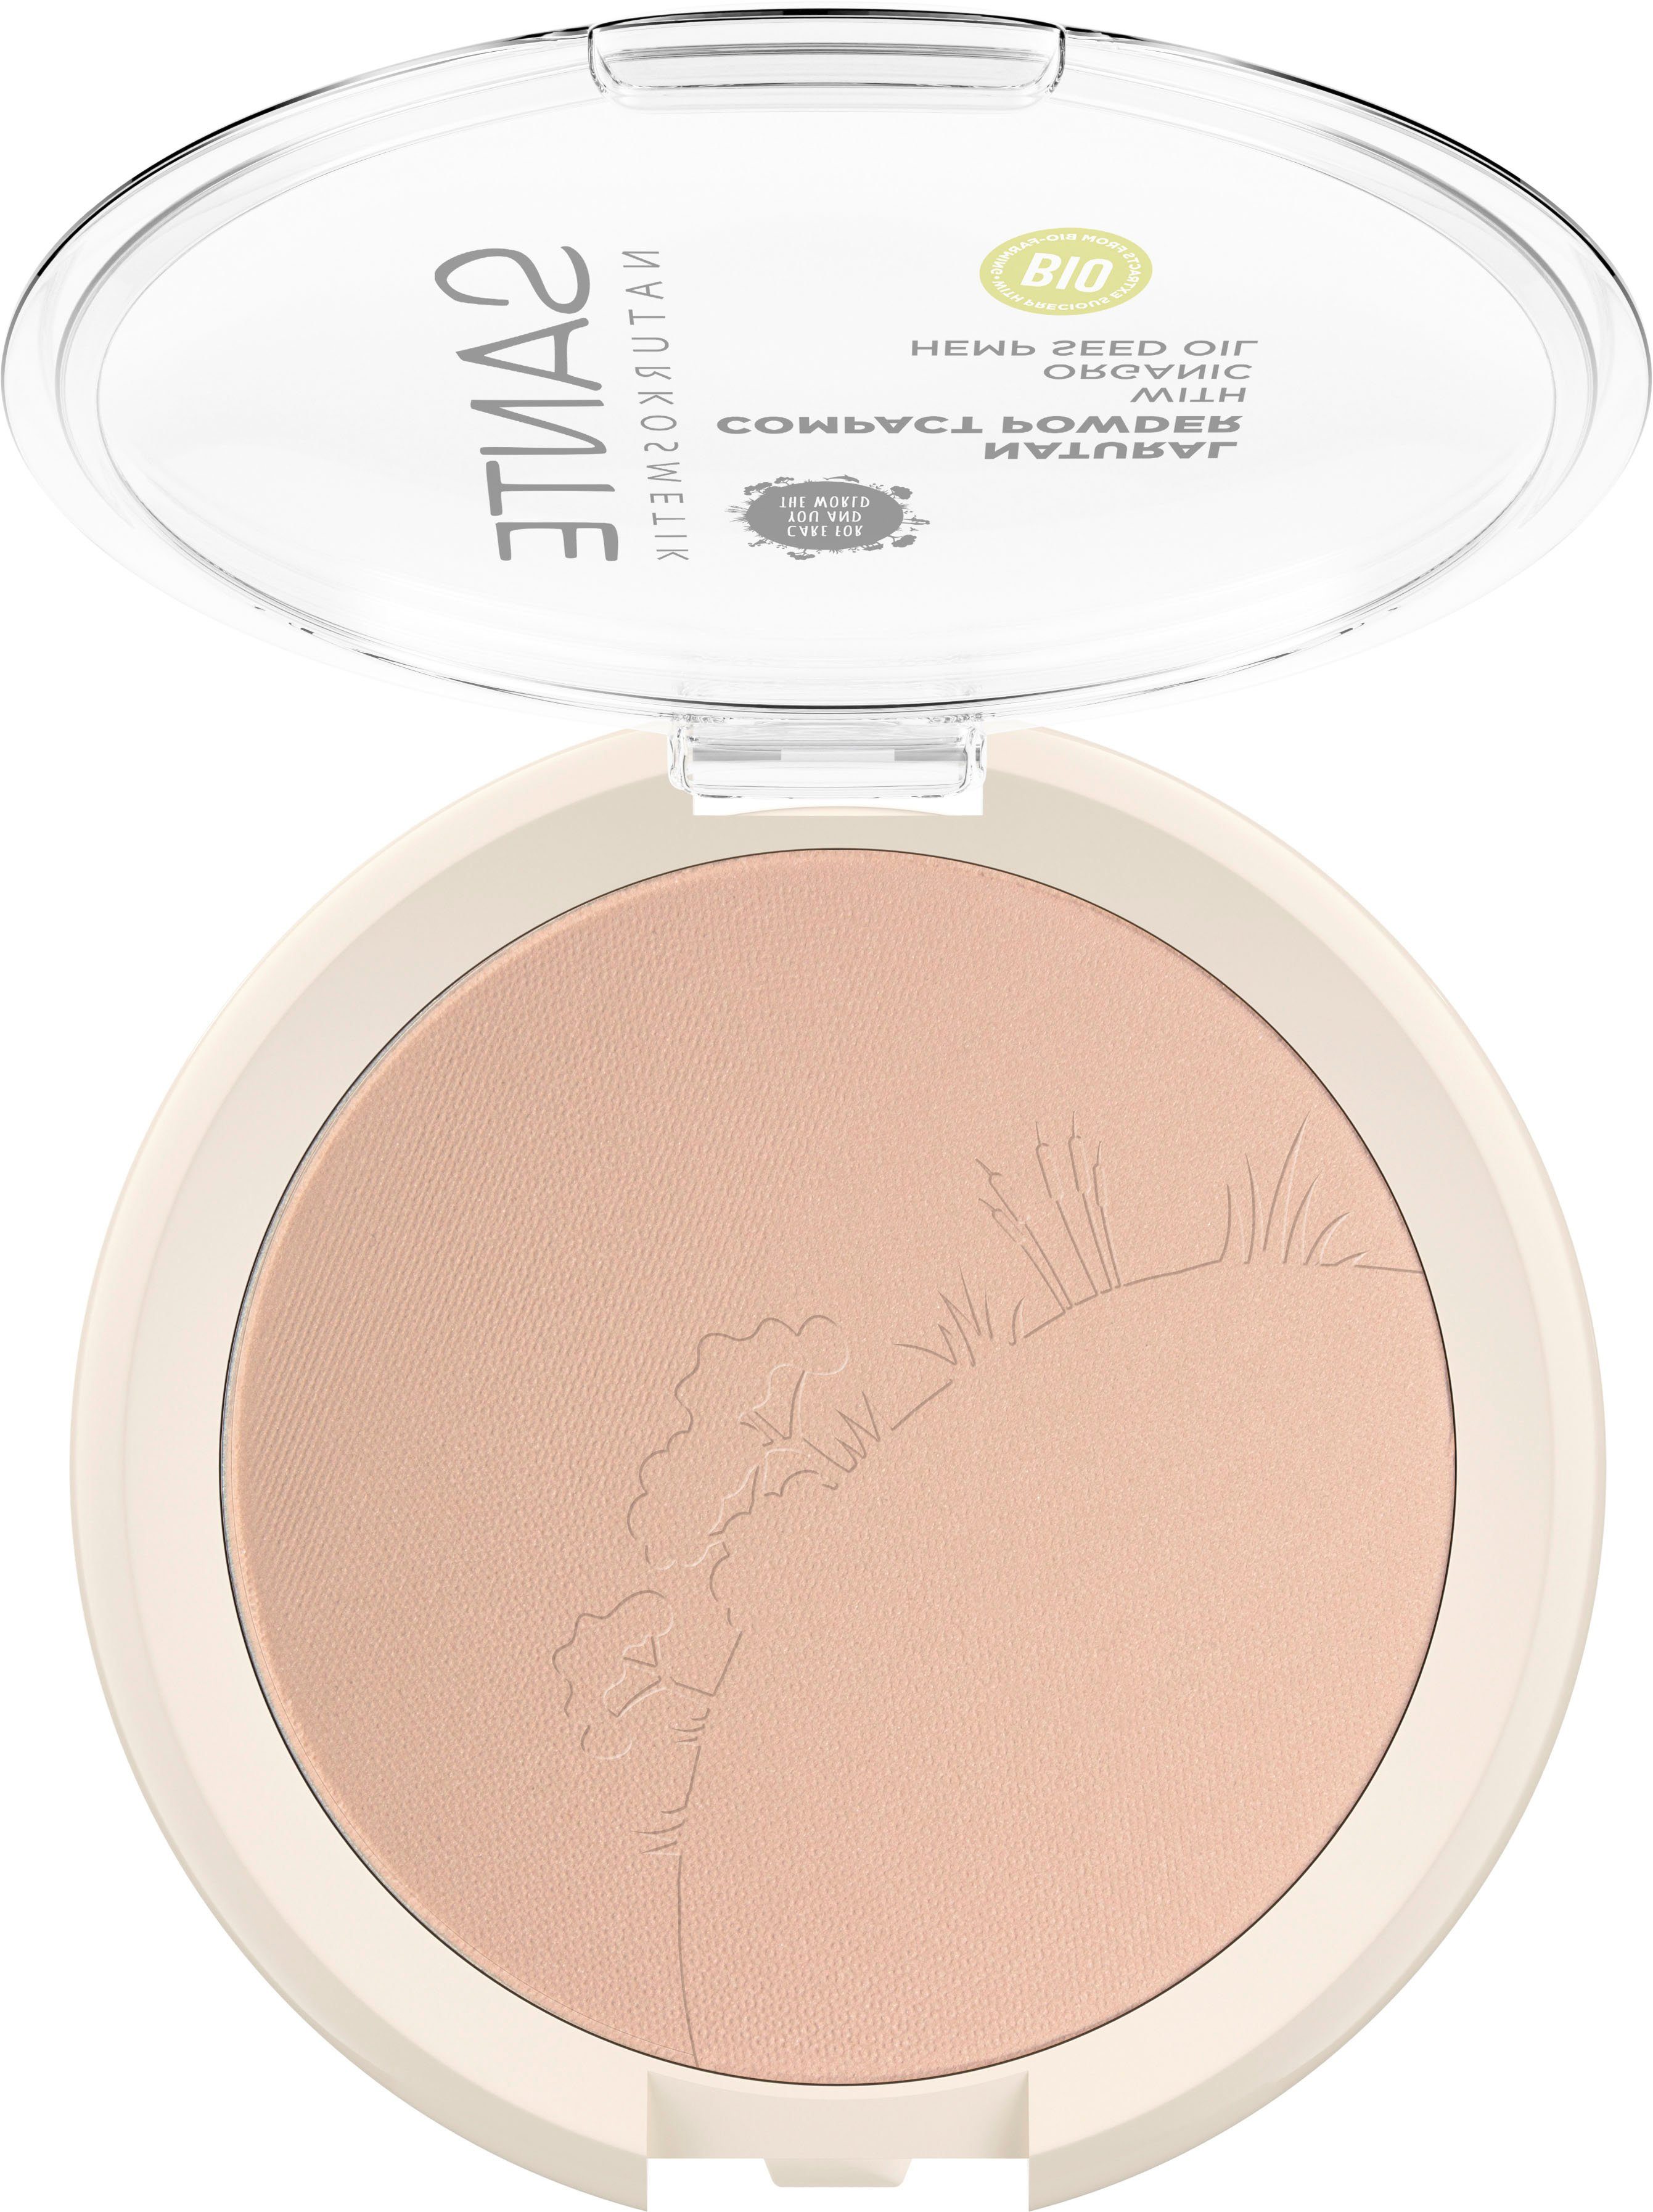 01 SANTE Natural Puder Ivory Cool Compact Powder